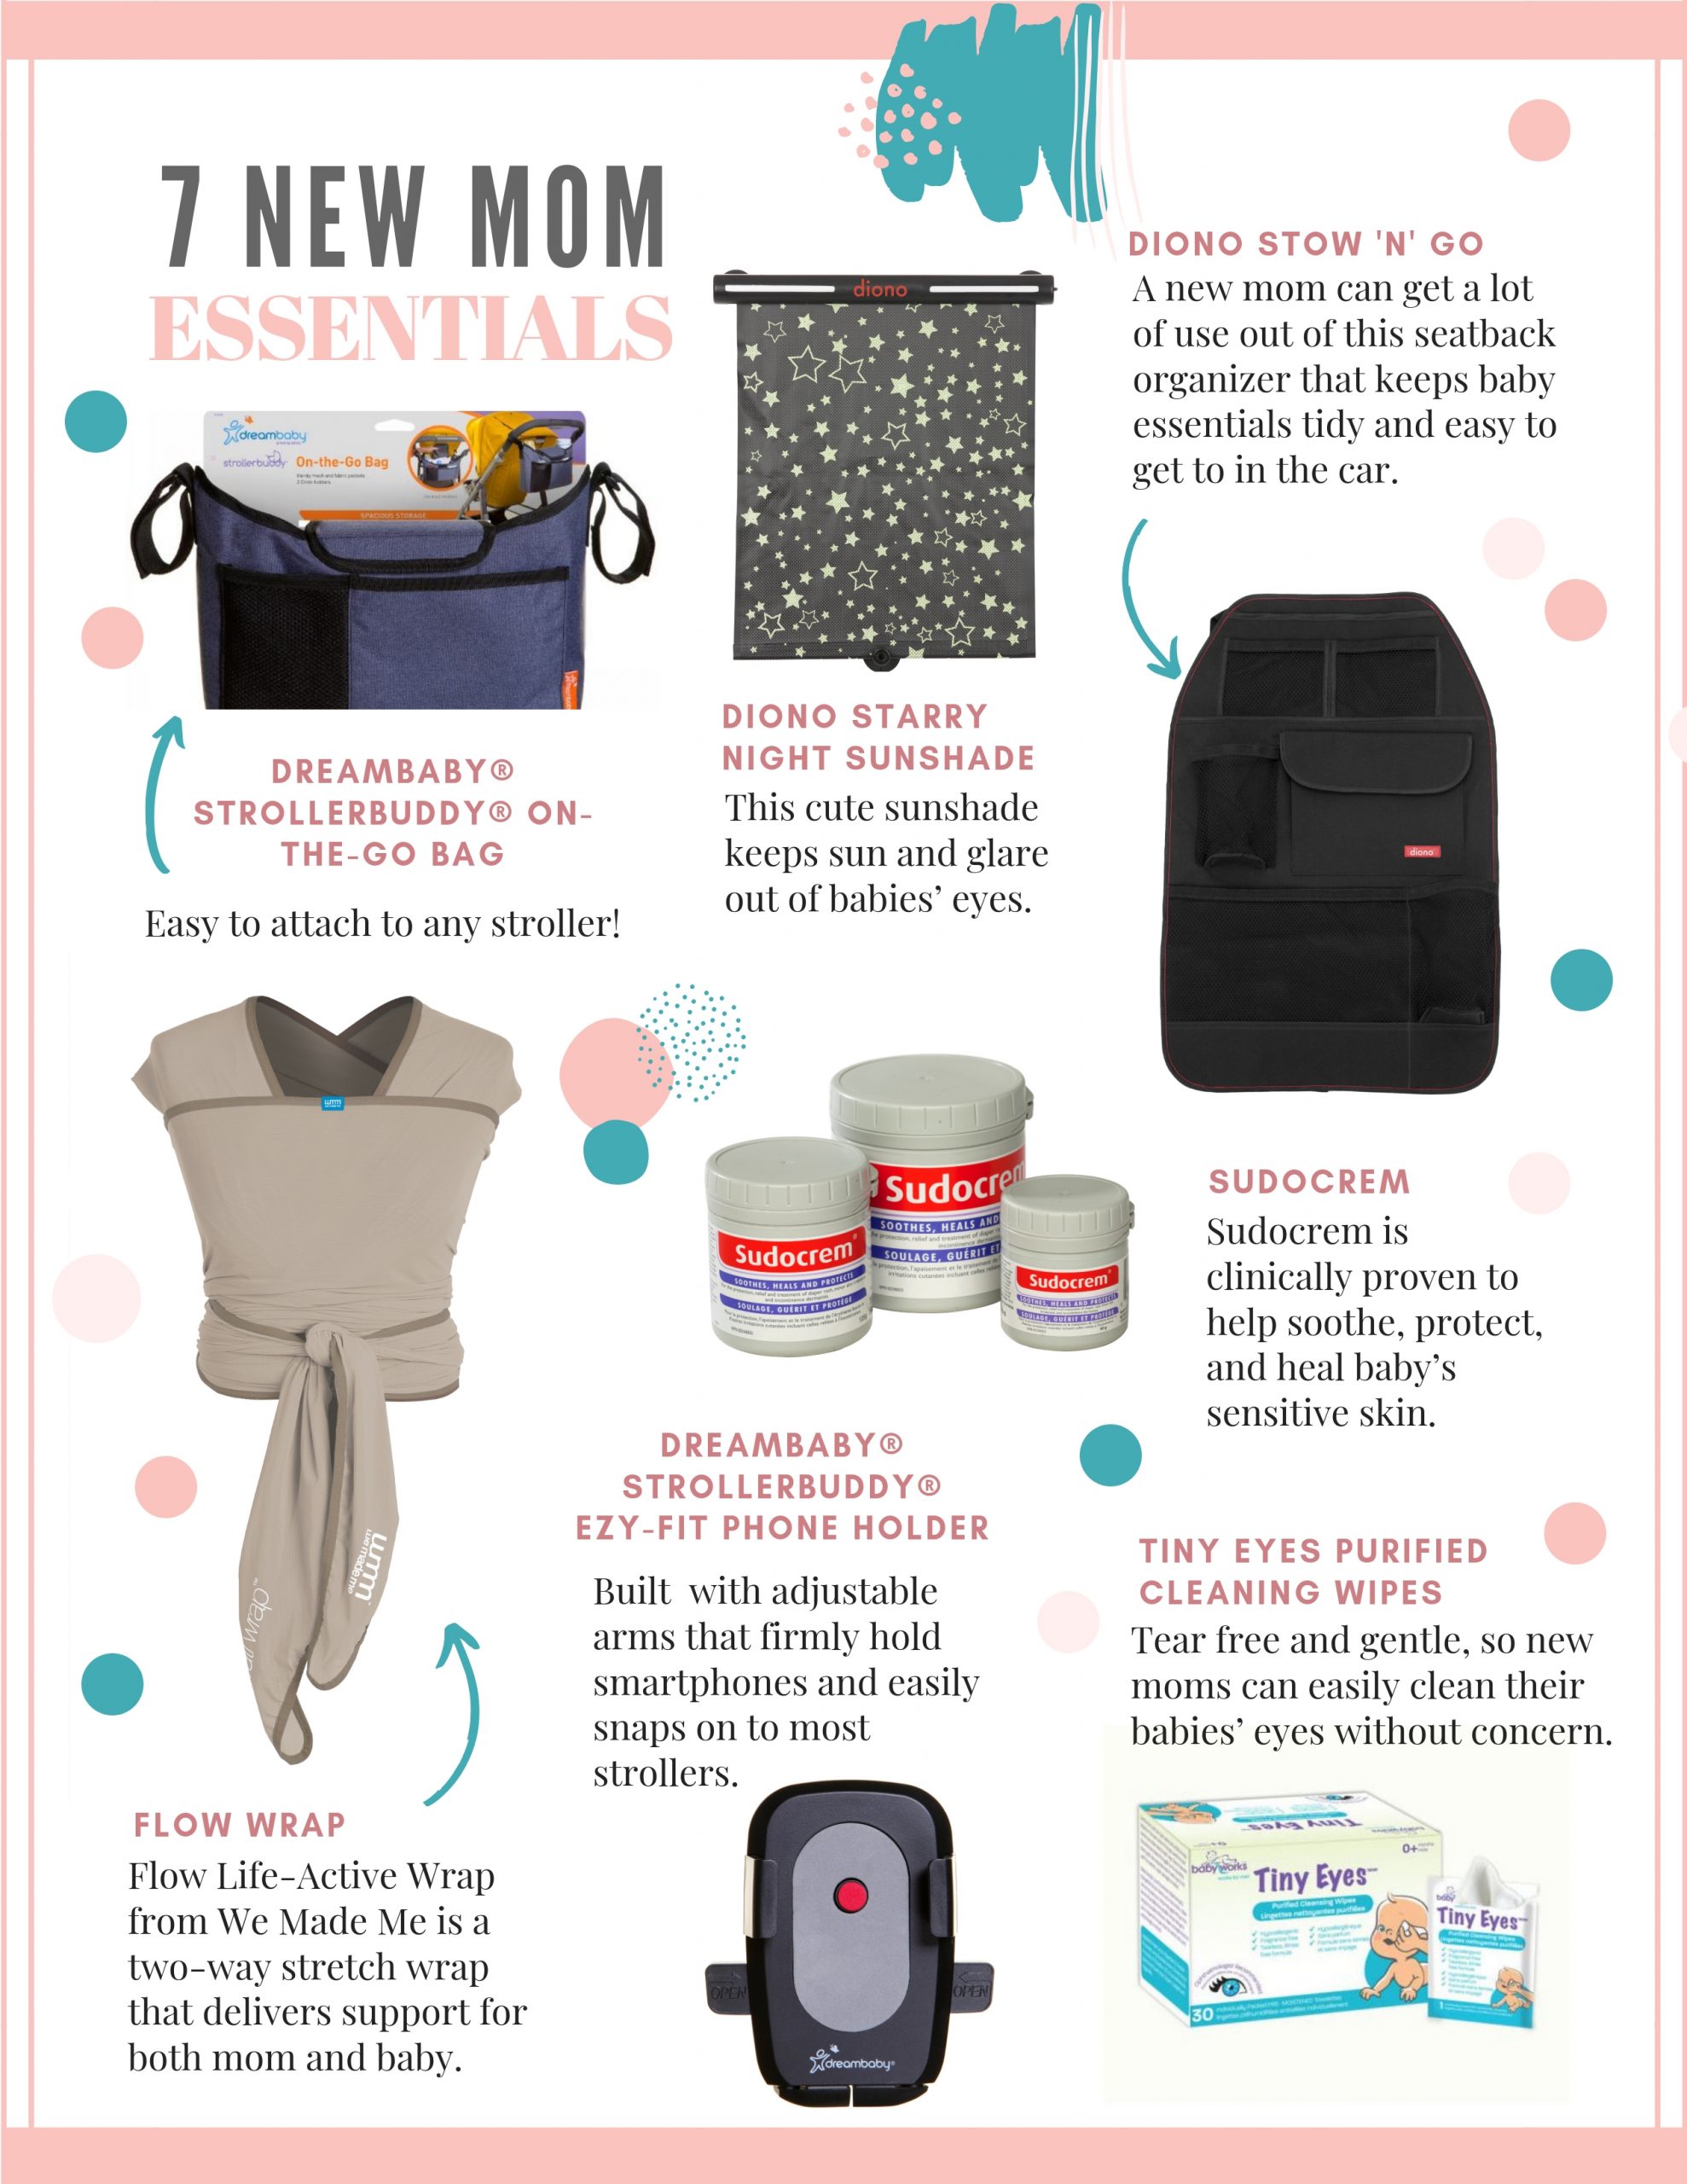 25 Essentials for New Moms and Babies